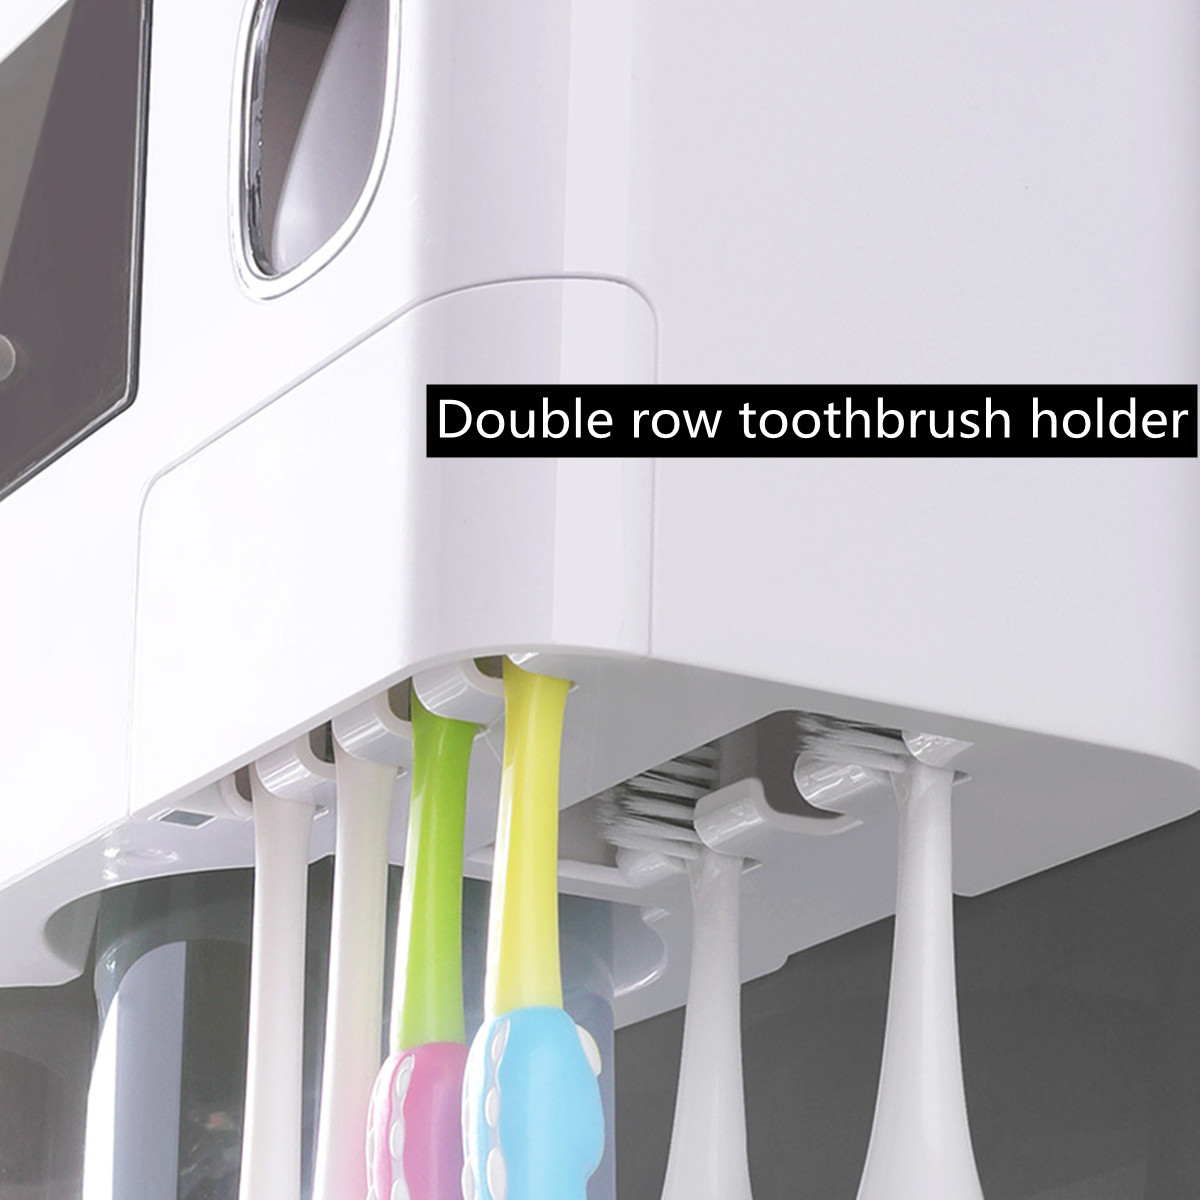 234-Cups-Multi-function-Toothbrush-Holder-Waterproof-Anti-dust-Mouth-Cup-Rack-Wall-mounted-Toothbrus-1924780-4